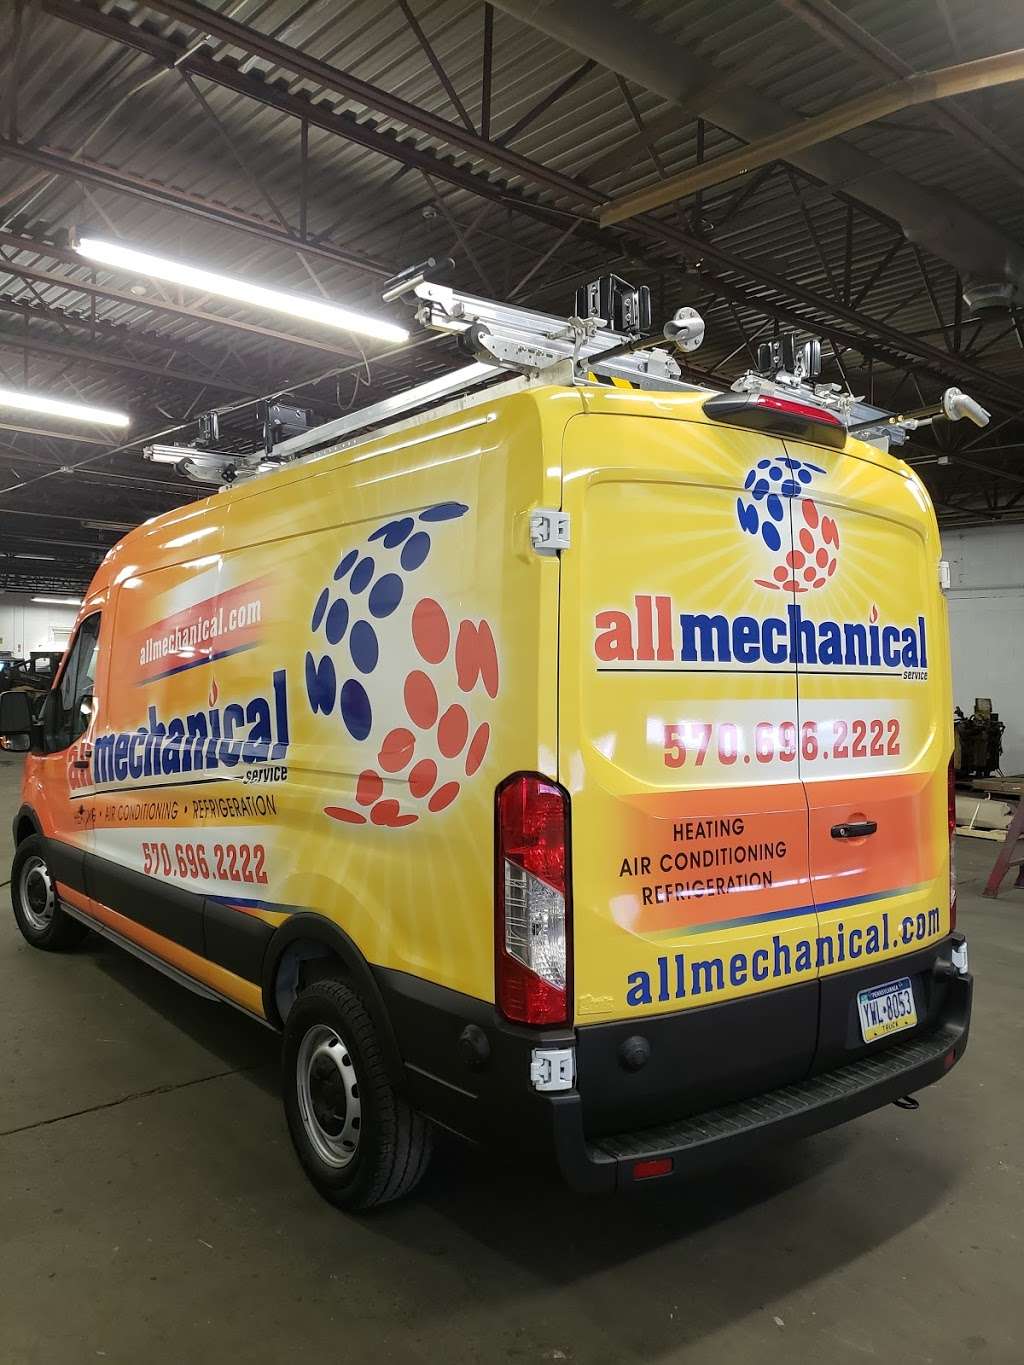 All Mechanical Service | 2521 Chase Rd, Shavertown, PA 18708 | Phone: (570) 696-2222